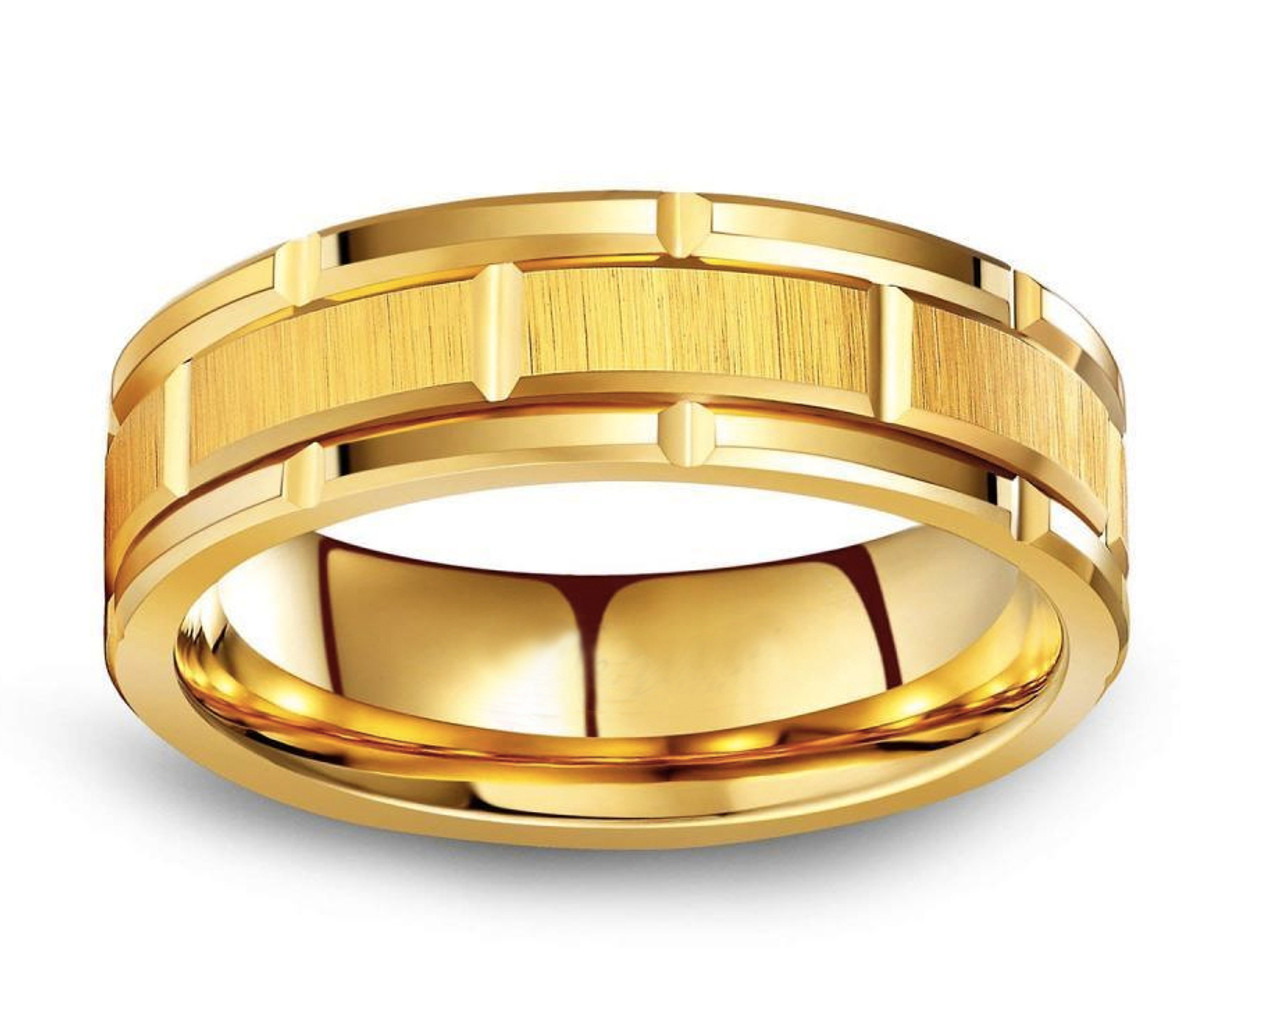 (8mm) Unisex or Men's Tungsten Carbide Wedding Ring Band. 14K Yellow Gold Brick Pattern Comfort Fit Grooved Ring.